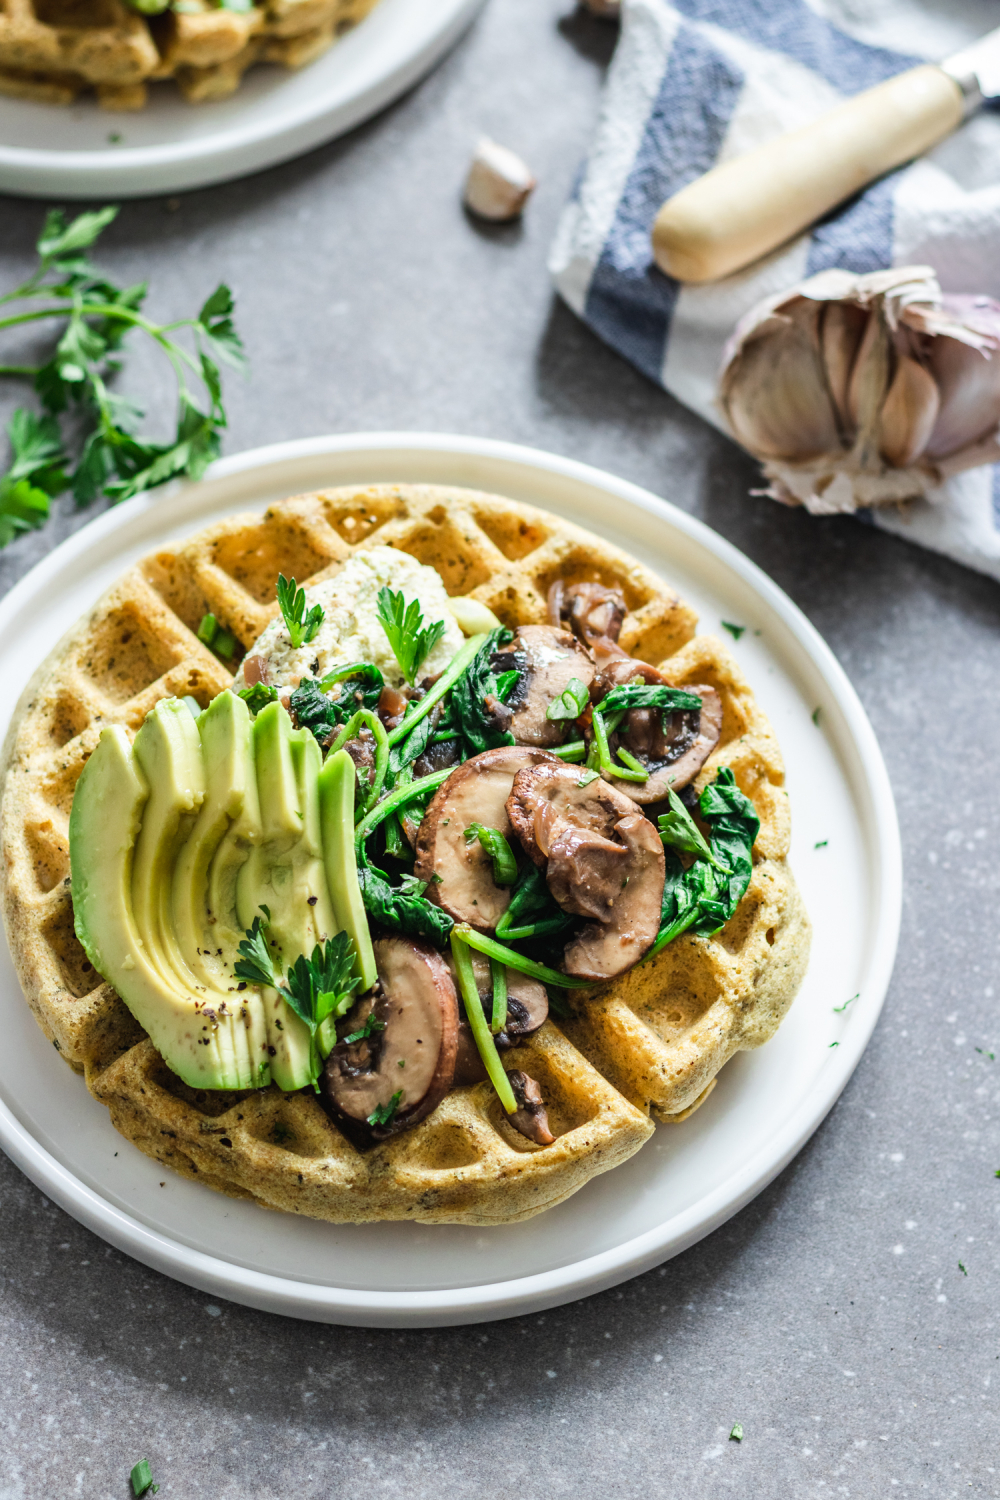 Corn Meal Waffles with Sautéed Cremini Mushrooms and Spinach